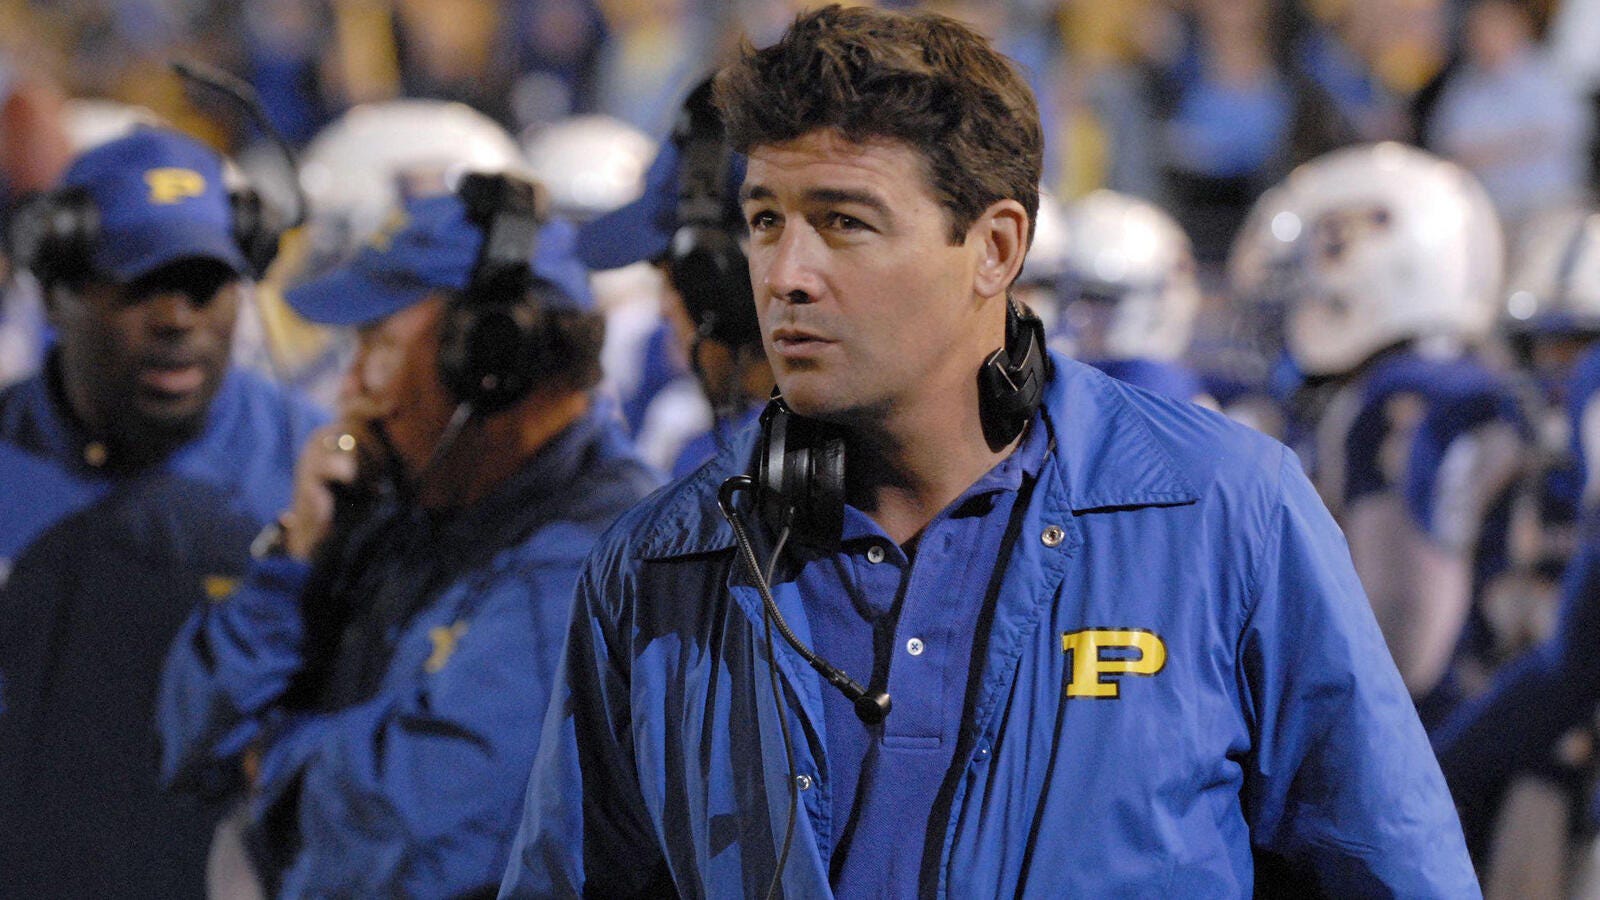 Friday Night Lights Review - What To Watch On Netflix